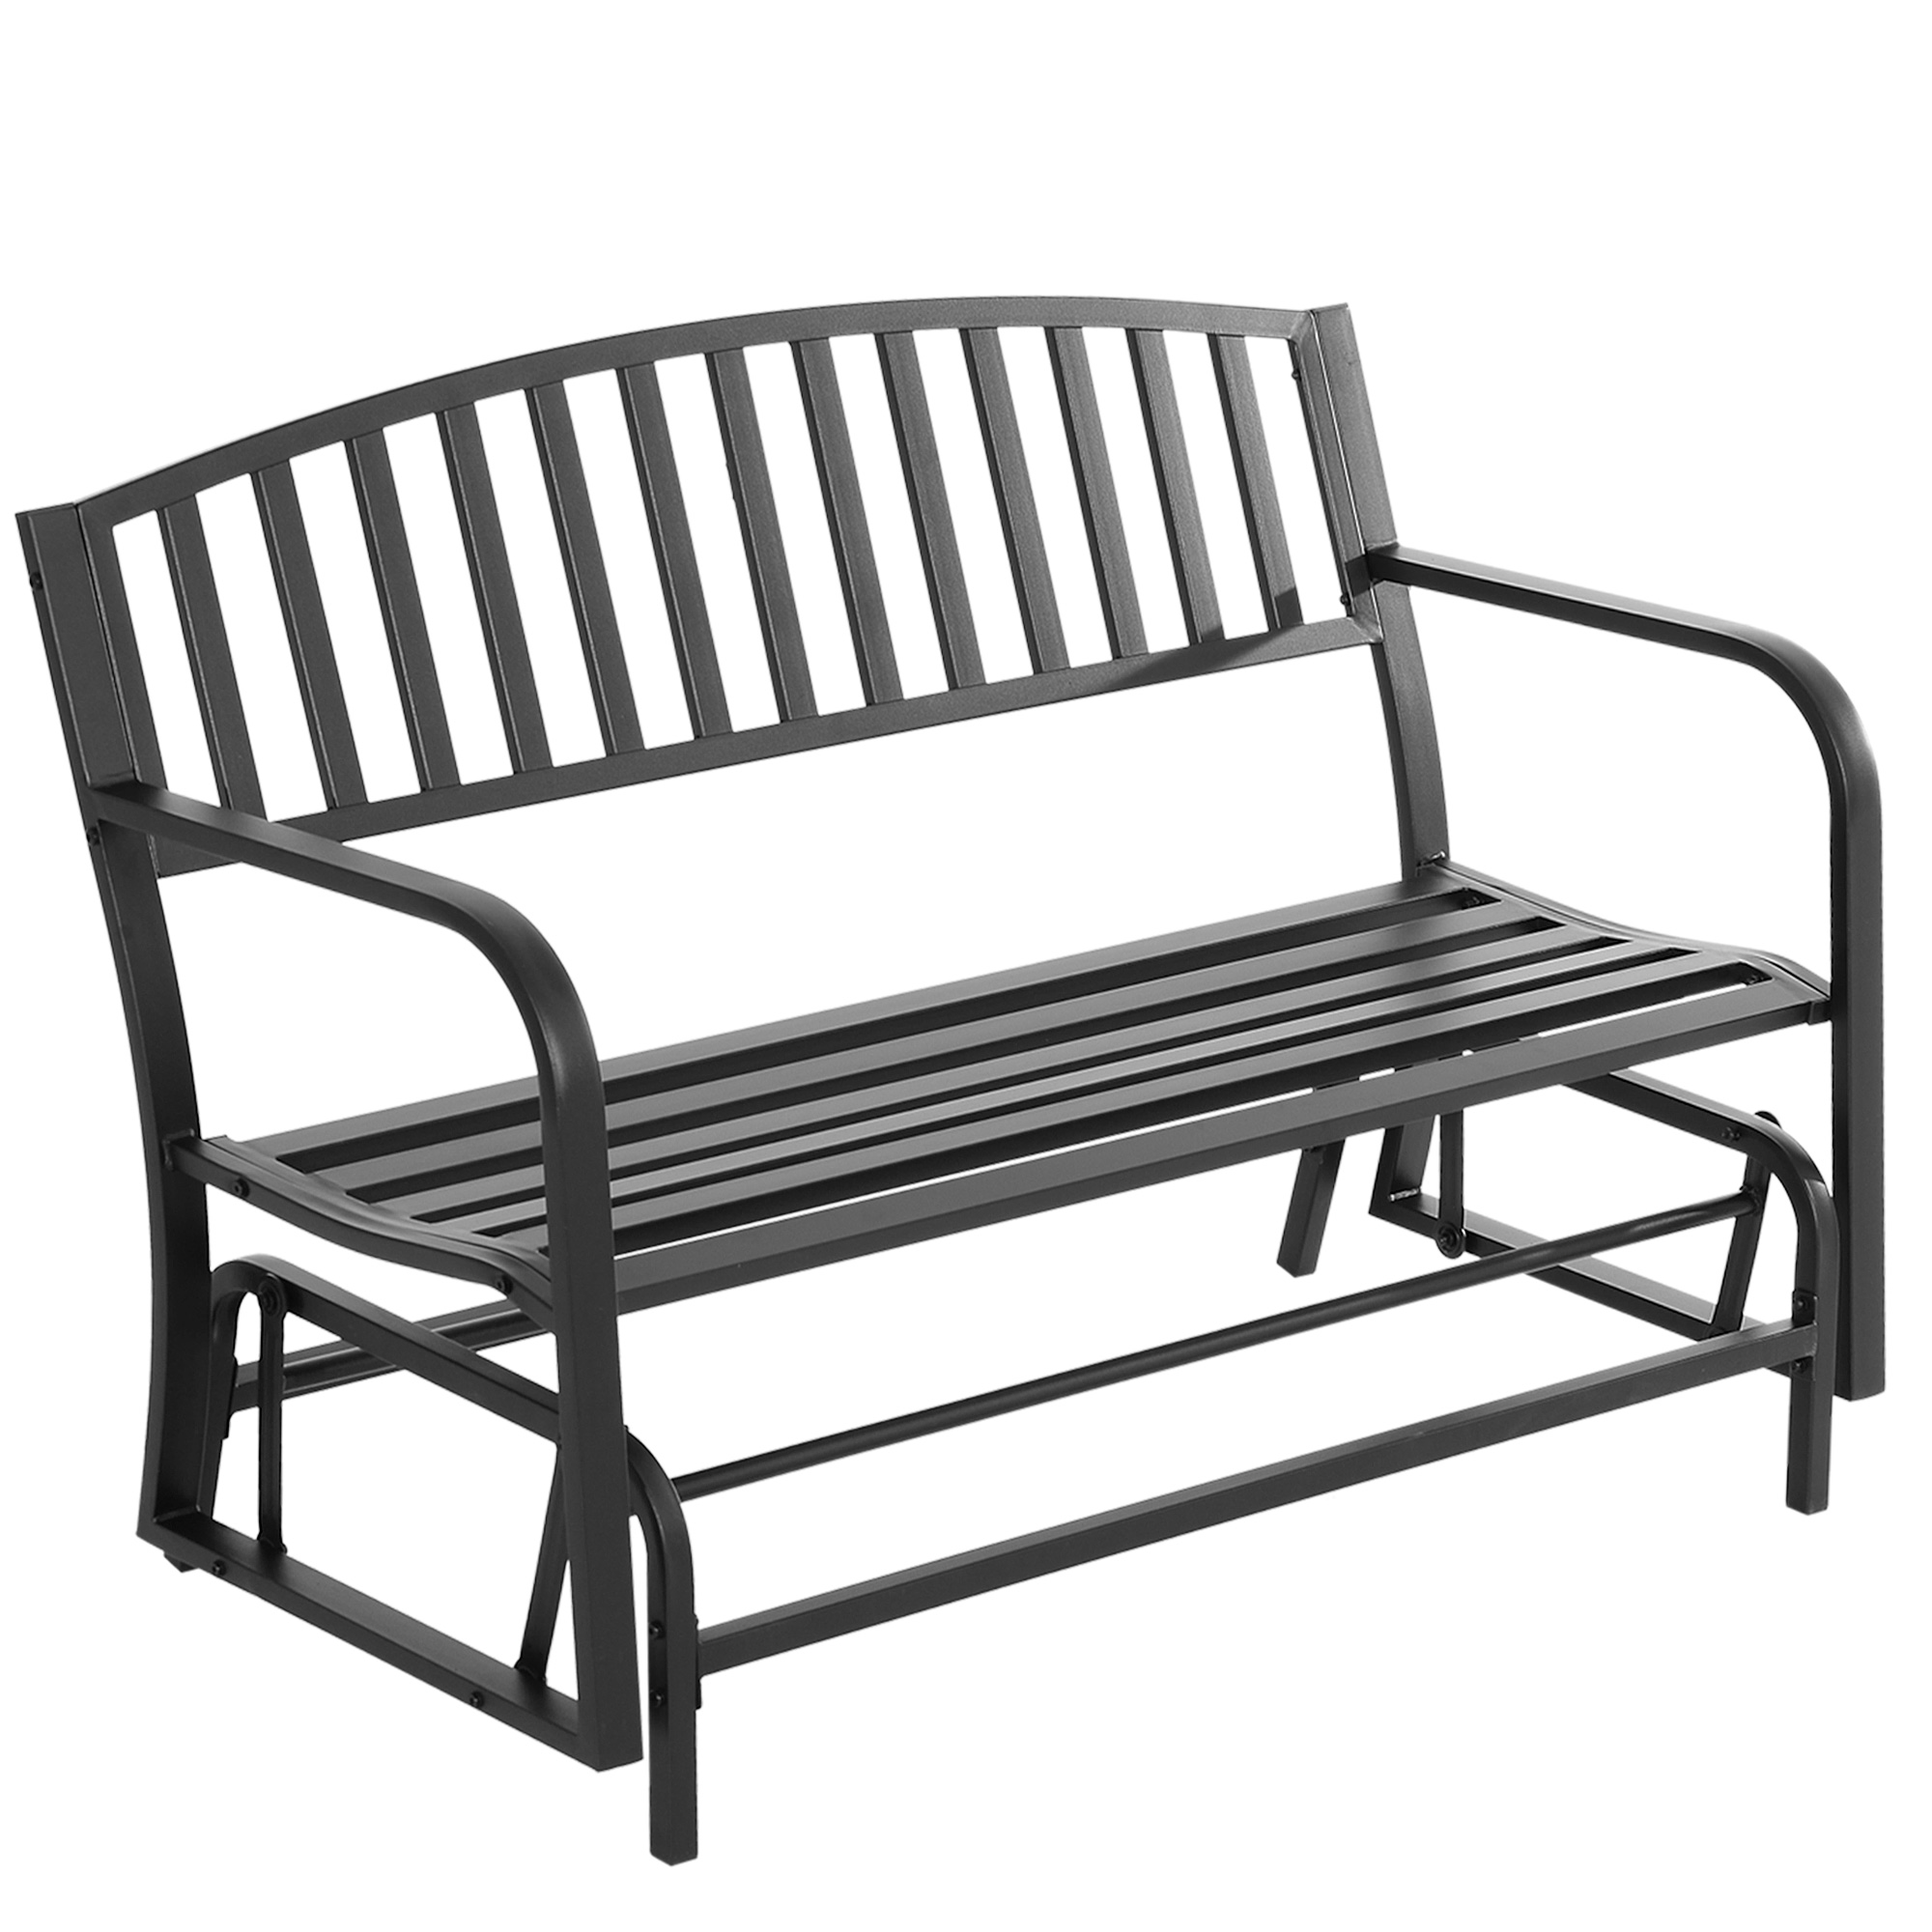 Outsunny Patio Glider Bench Outdoor Swing Rocking Chair Loveseat with Power Coated Sturdy Steel Frame, Black - image 1 of 9